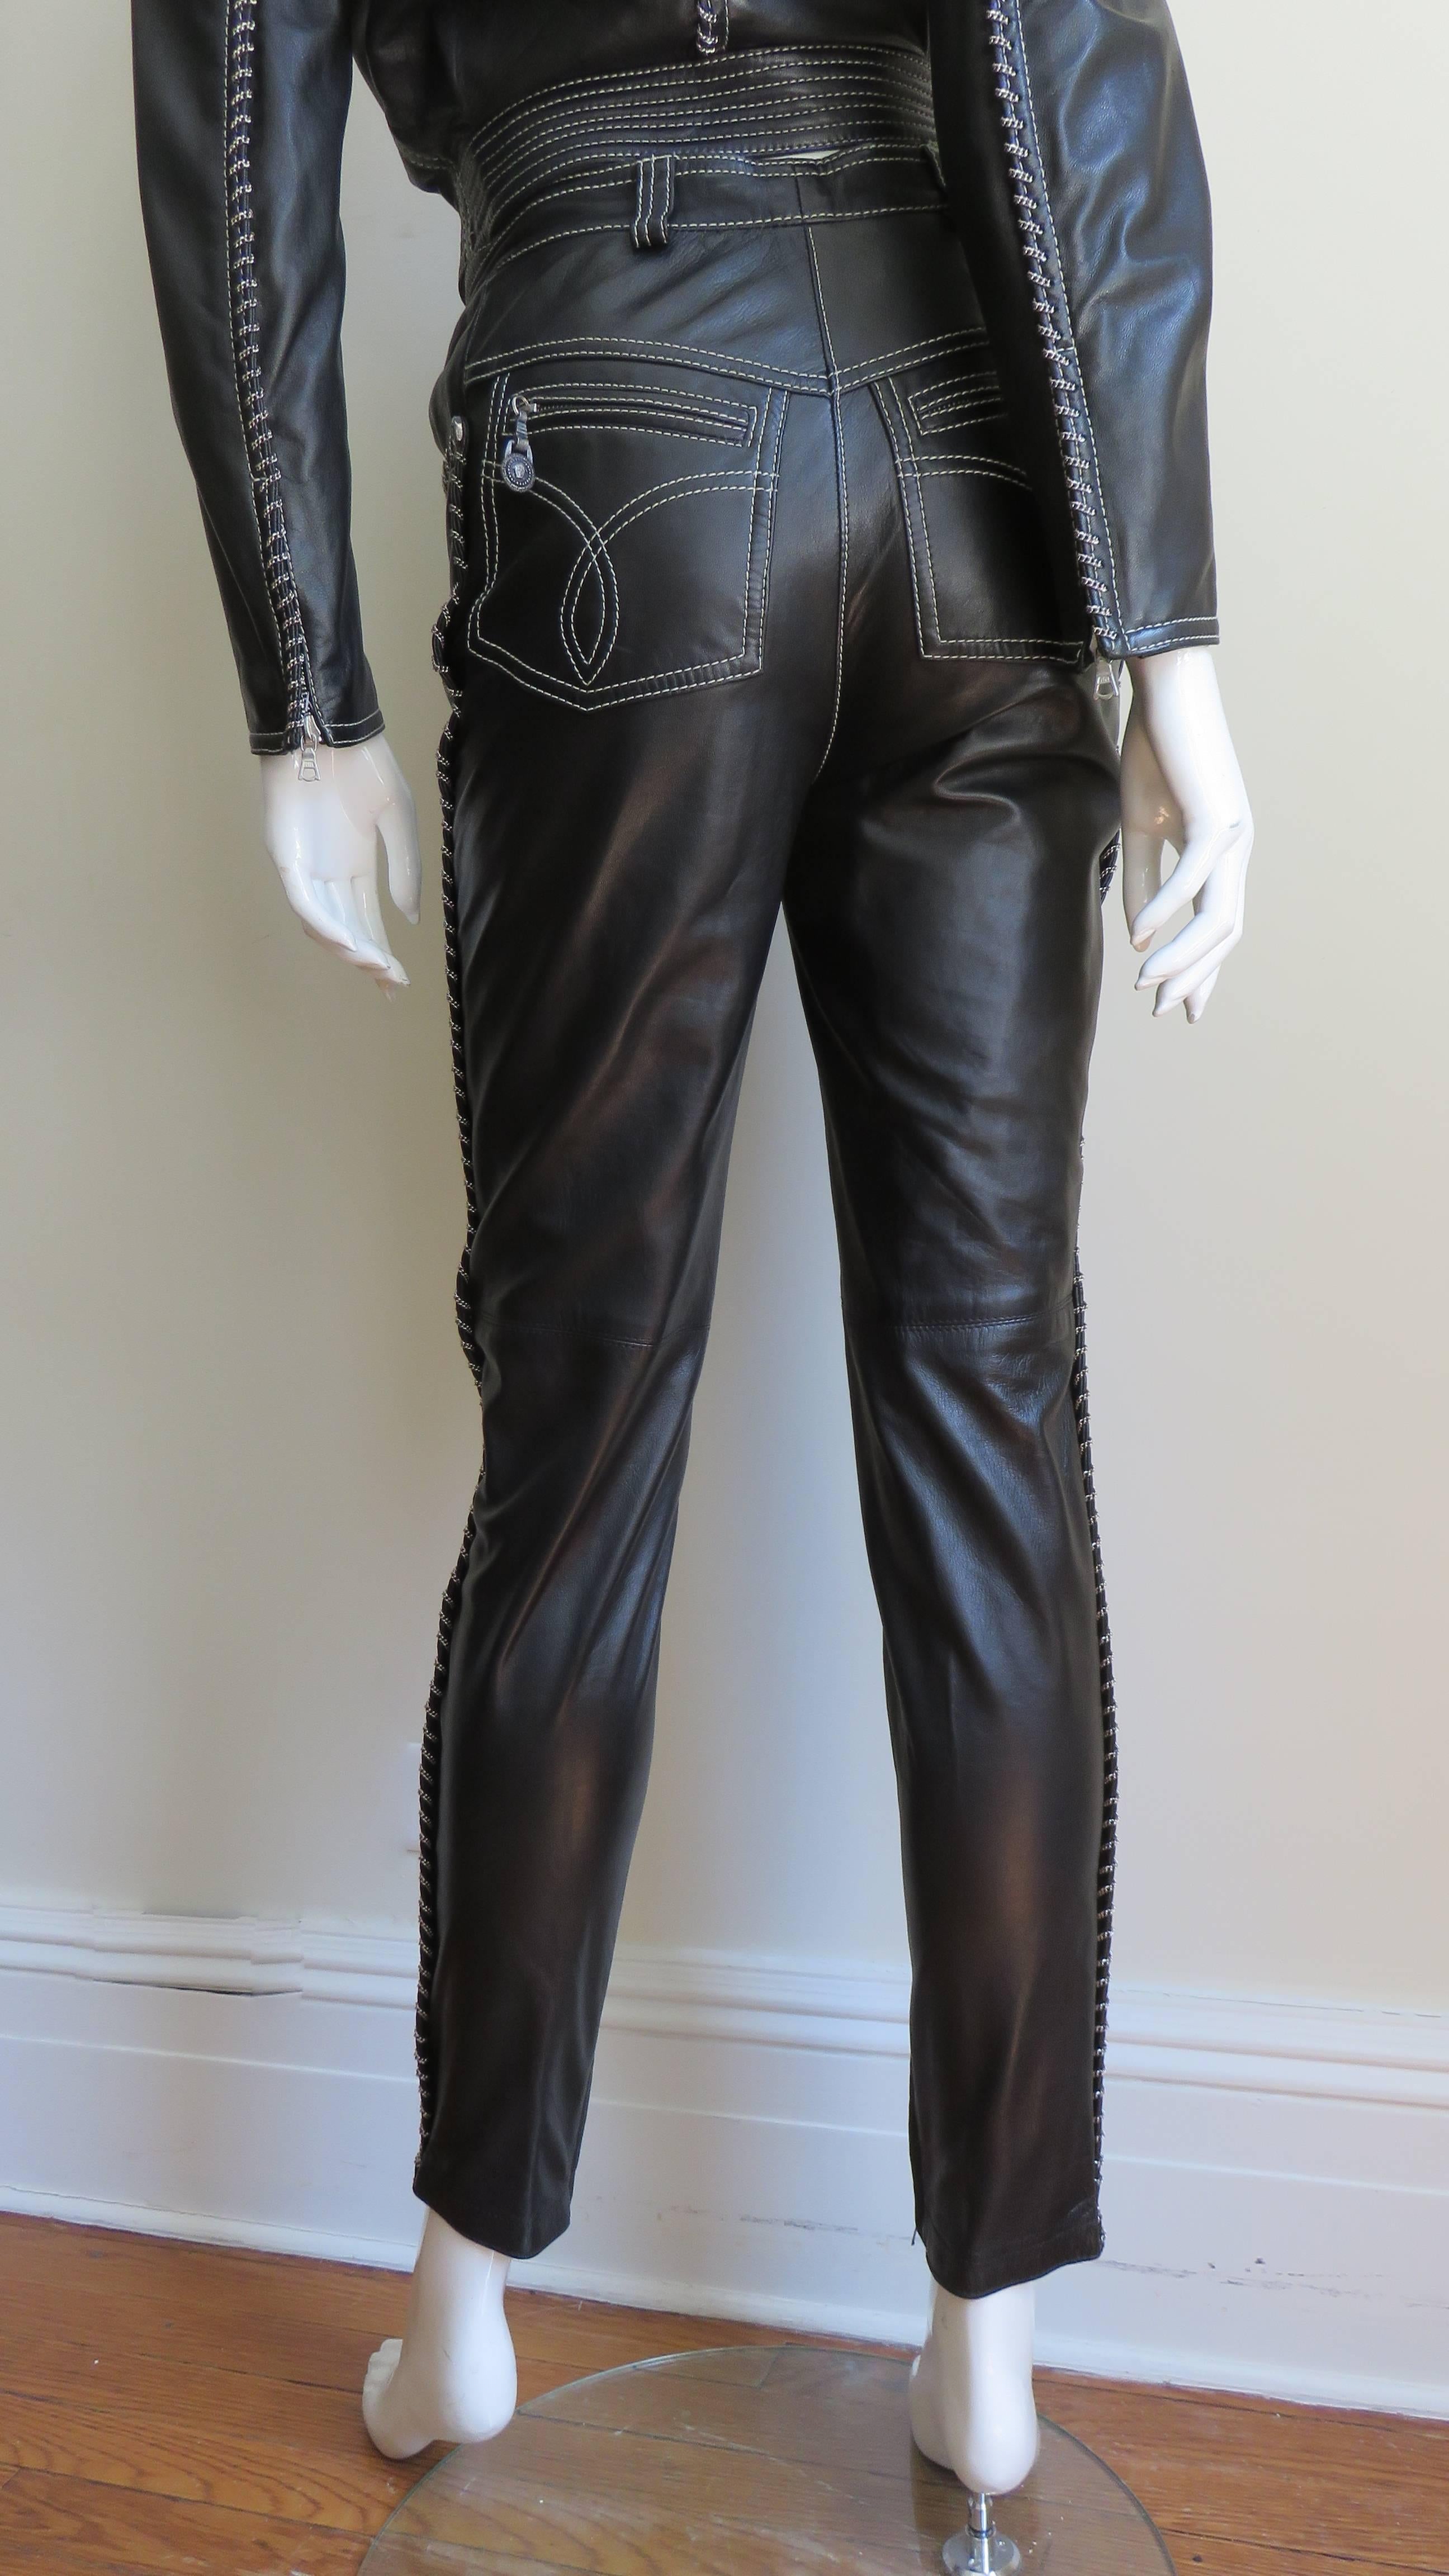  Gianni Versace A/W 1992 Leather Motorcycle Jacket and Pants With Chain Trim  For Sale 9